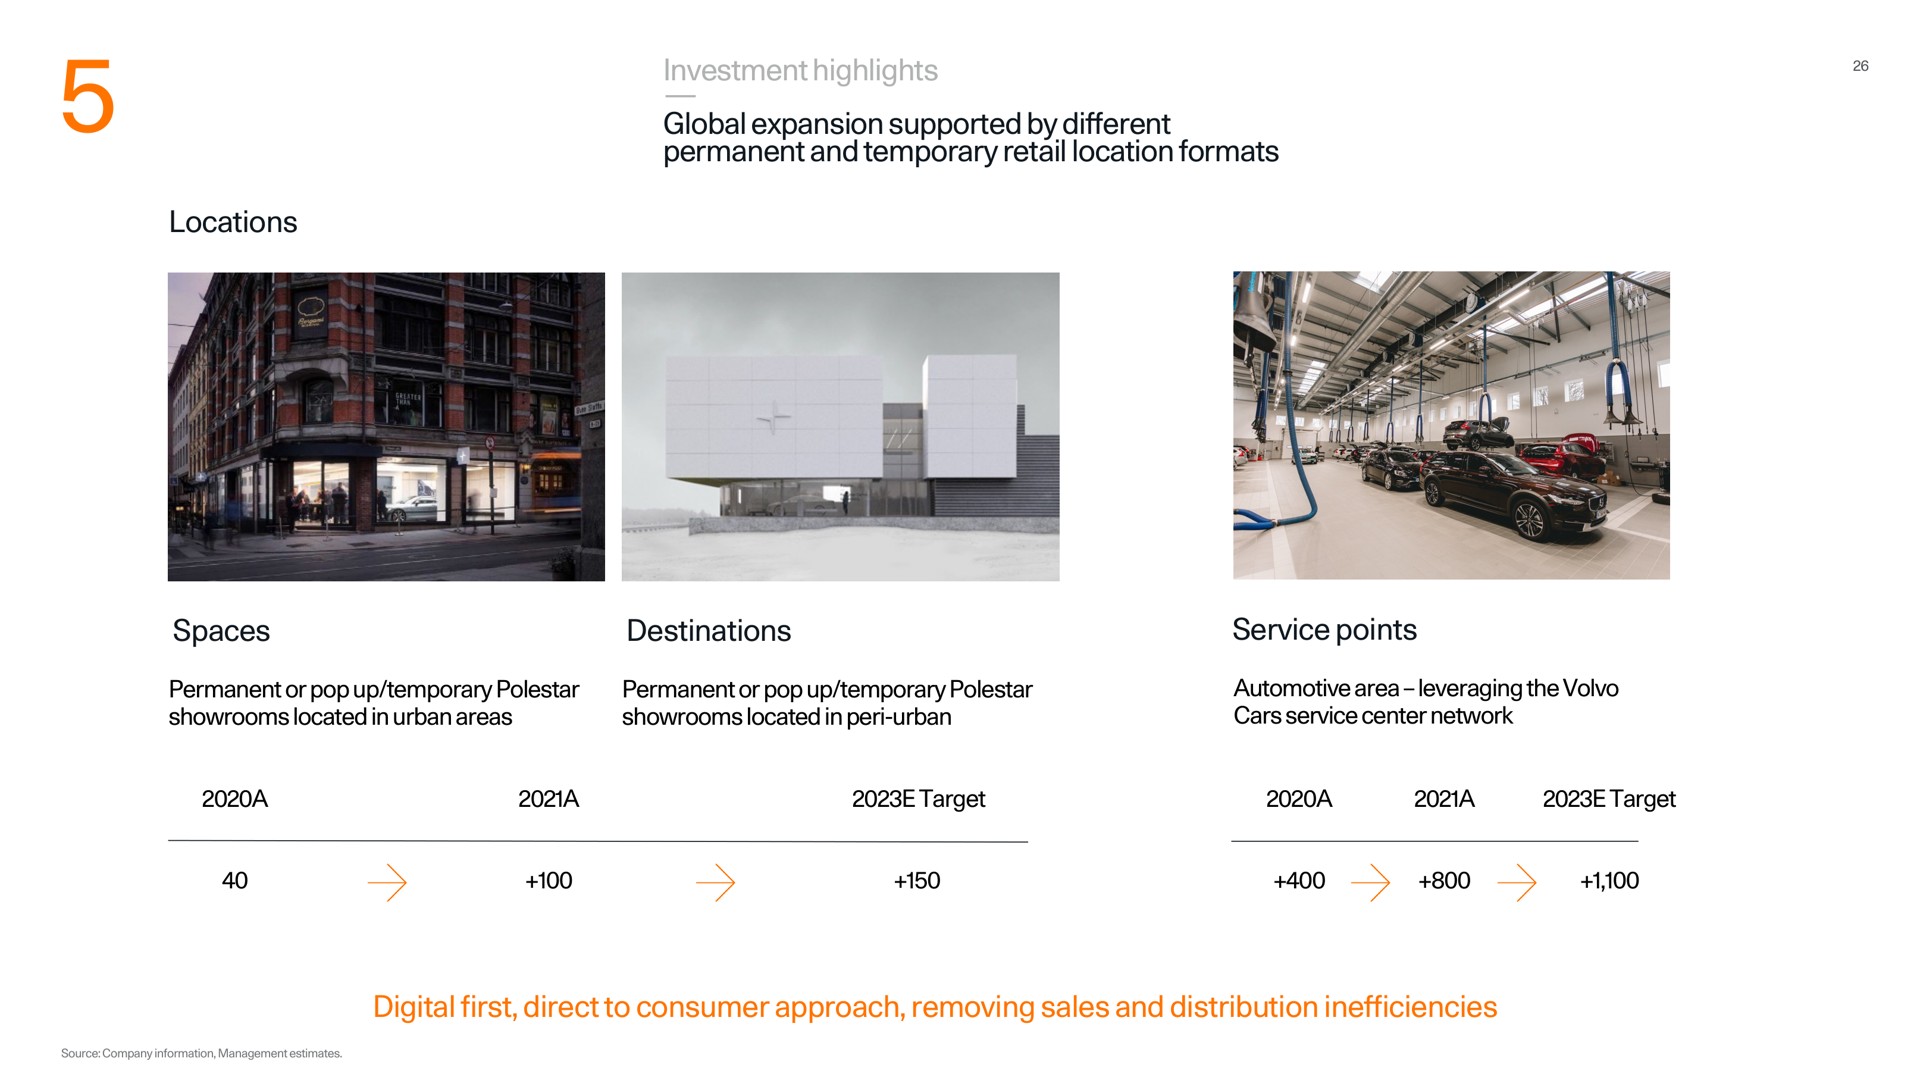 locations investment highlights global expansion supported by different permanent and temporary retail location formats spaces destinations service points digital first direct to consumer approach removing sales and distribution inefficiencies | Polestar